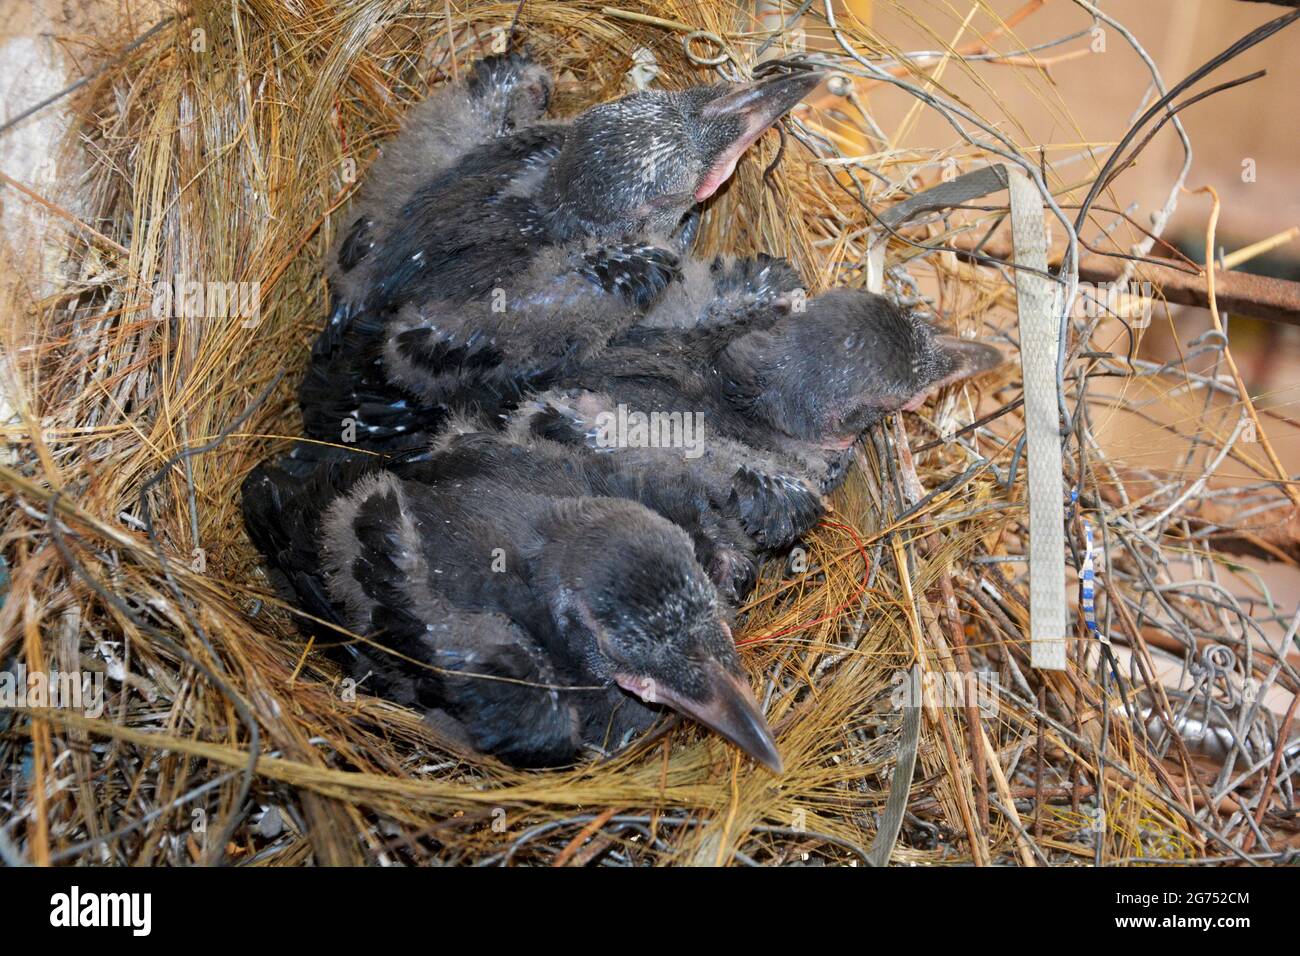 Close up of three new born Indian crows, Corvus splendens  hatched in straw nest, selective focusing Stock Photo